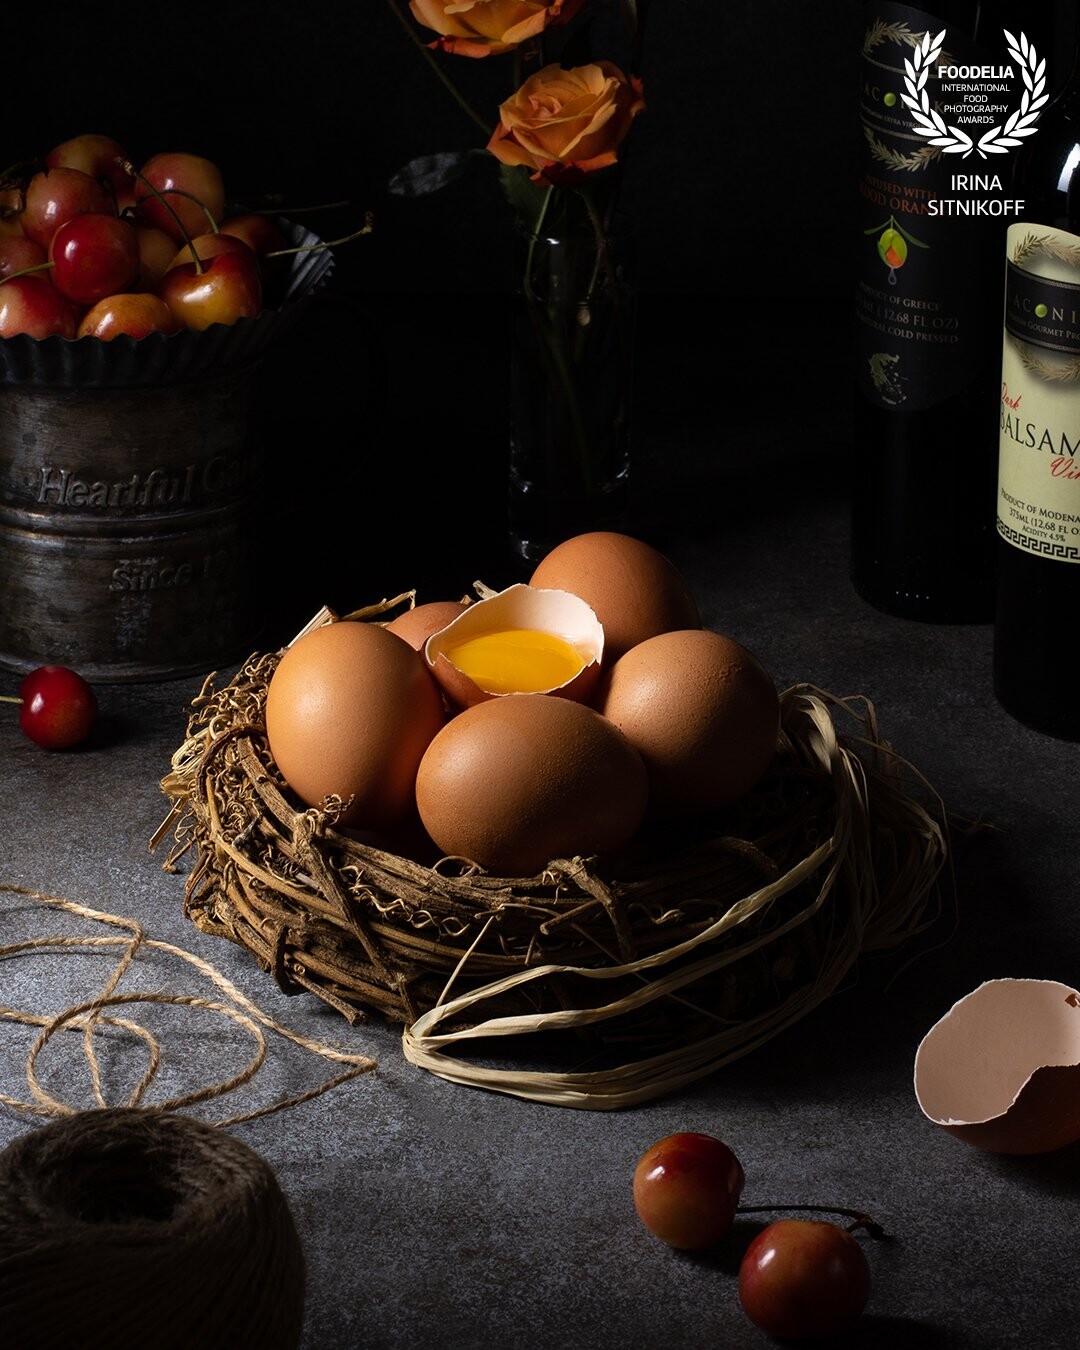 The beauty is all around us, it is even in simple things like eggs. I enjoyed working with this image, especially working with the light to create a mysterious look.